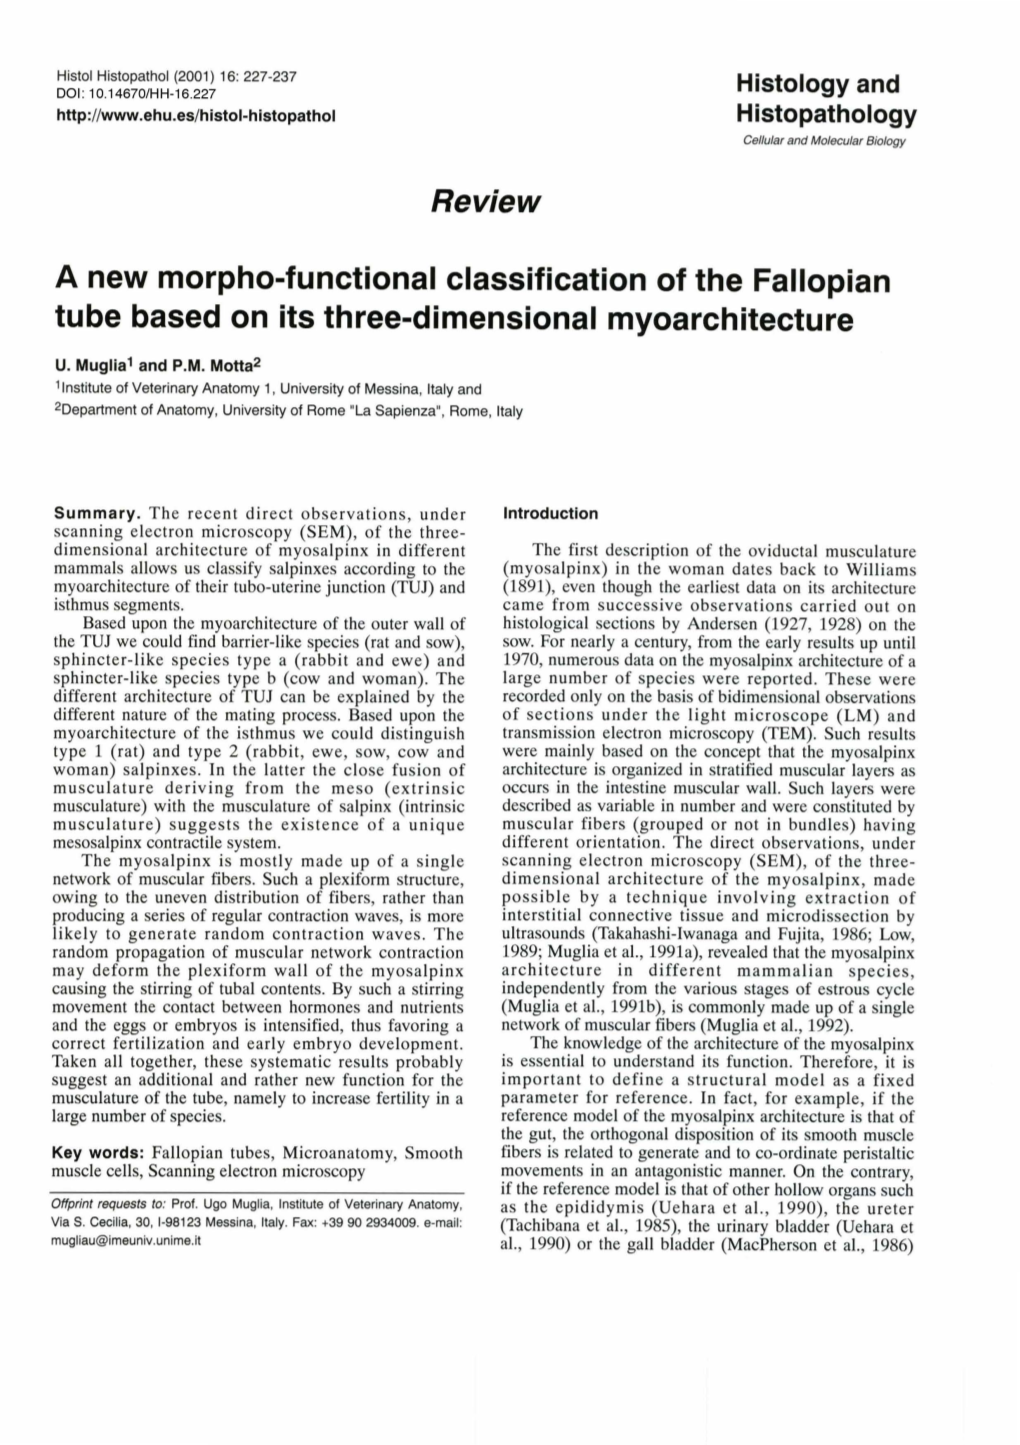 Review a New Morpho-Functional Classification of the Fallopian Tube